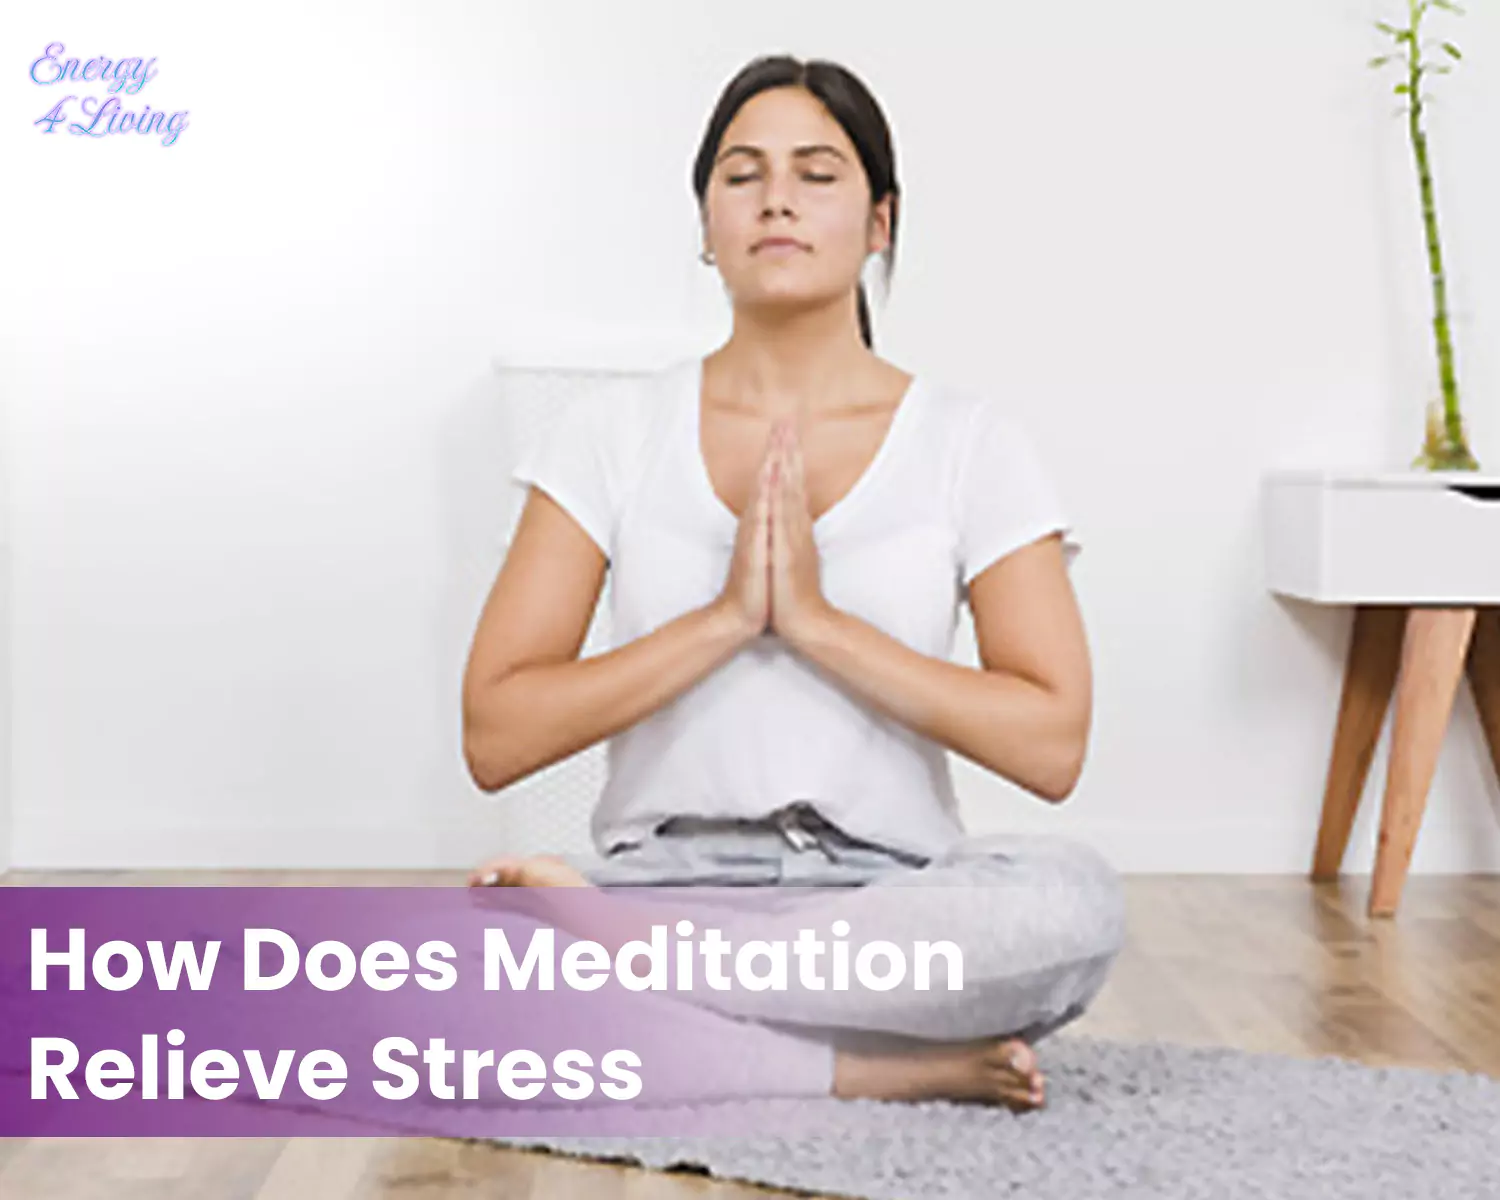 How Does Meditation Relieve Stress?